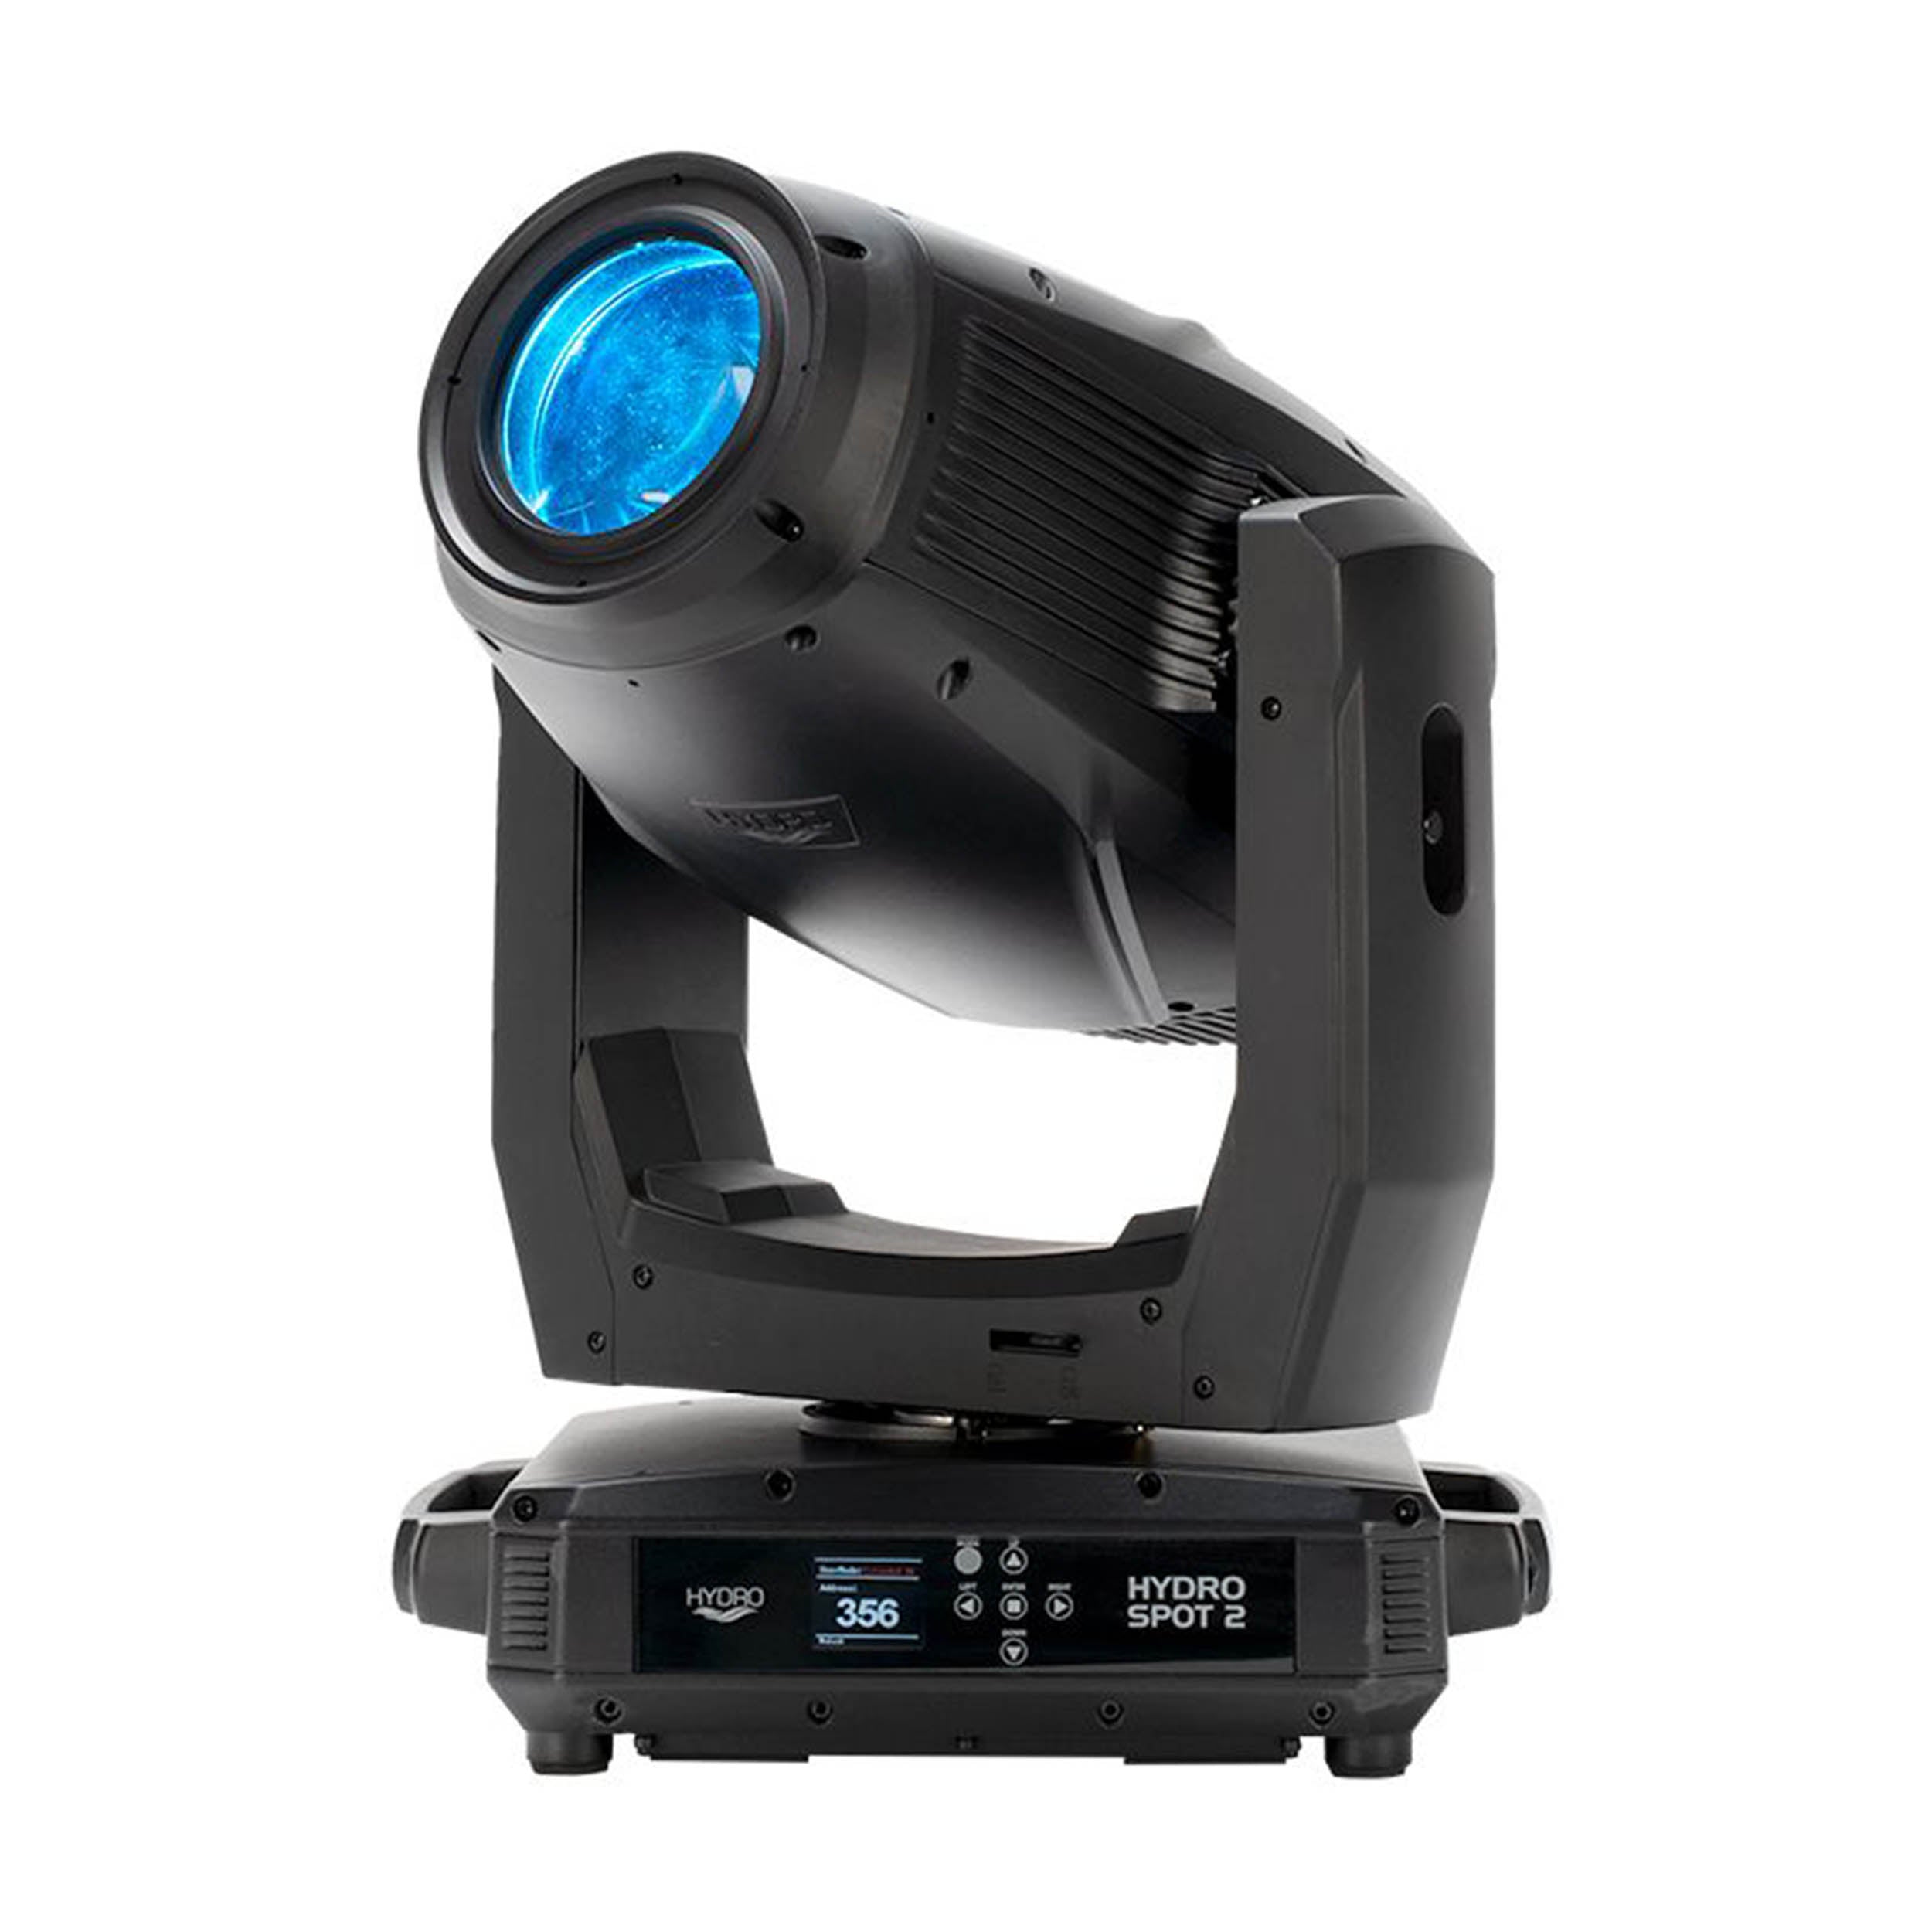 ADJ Hydro Spot 2, IP65-Rated Professional Moving Head Luminaire with 320-Watt Cool White LED Engine by ADJ